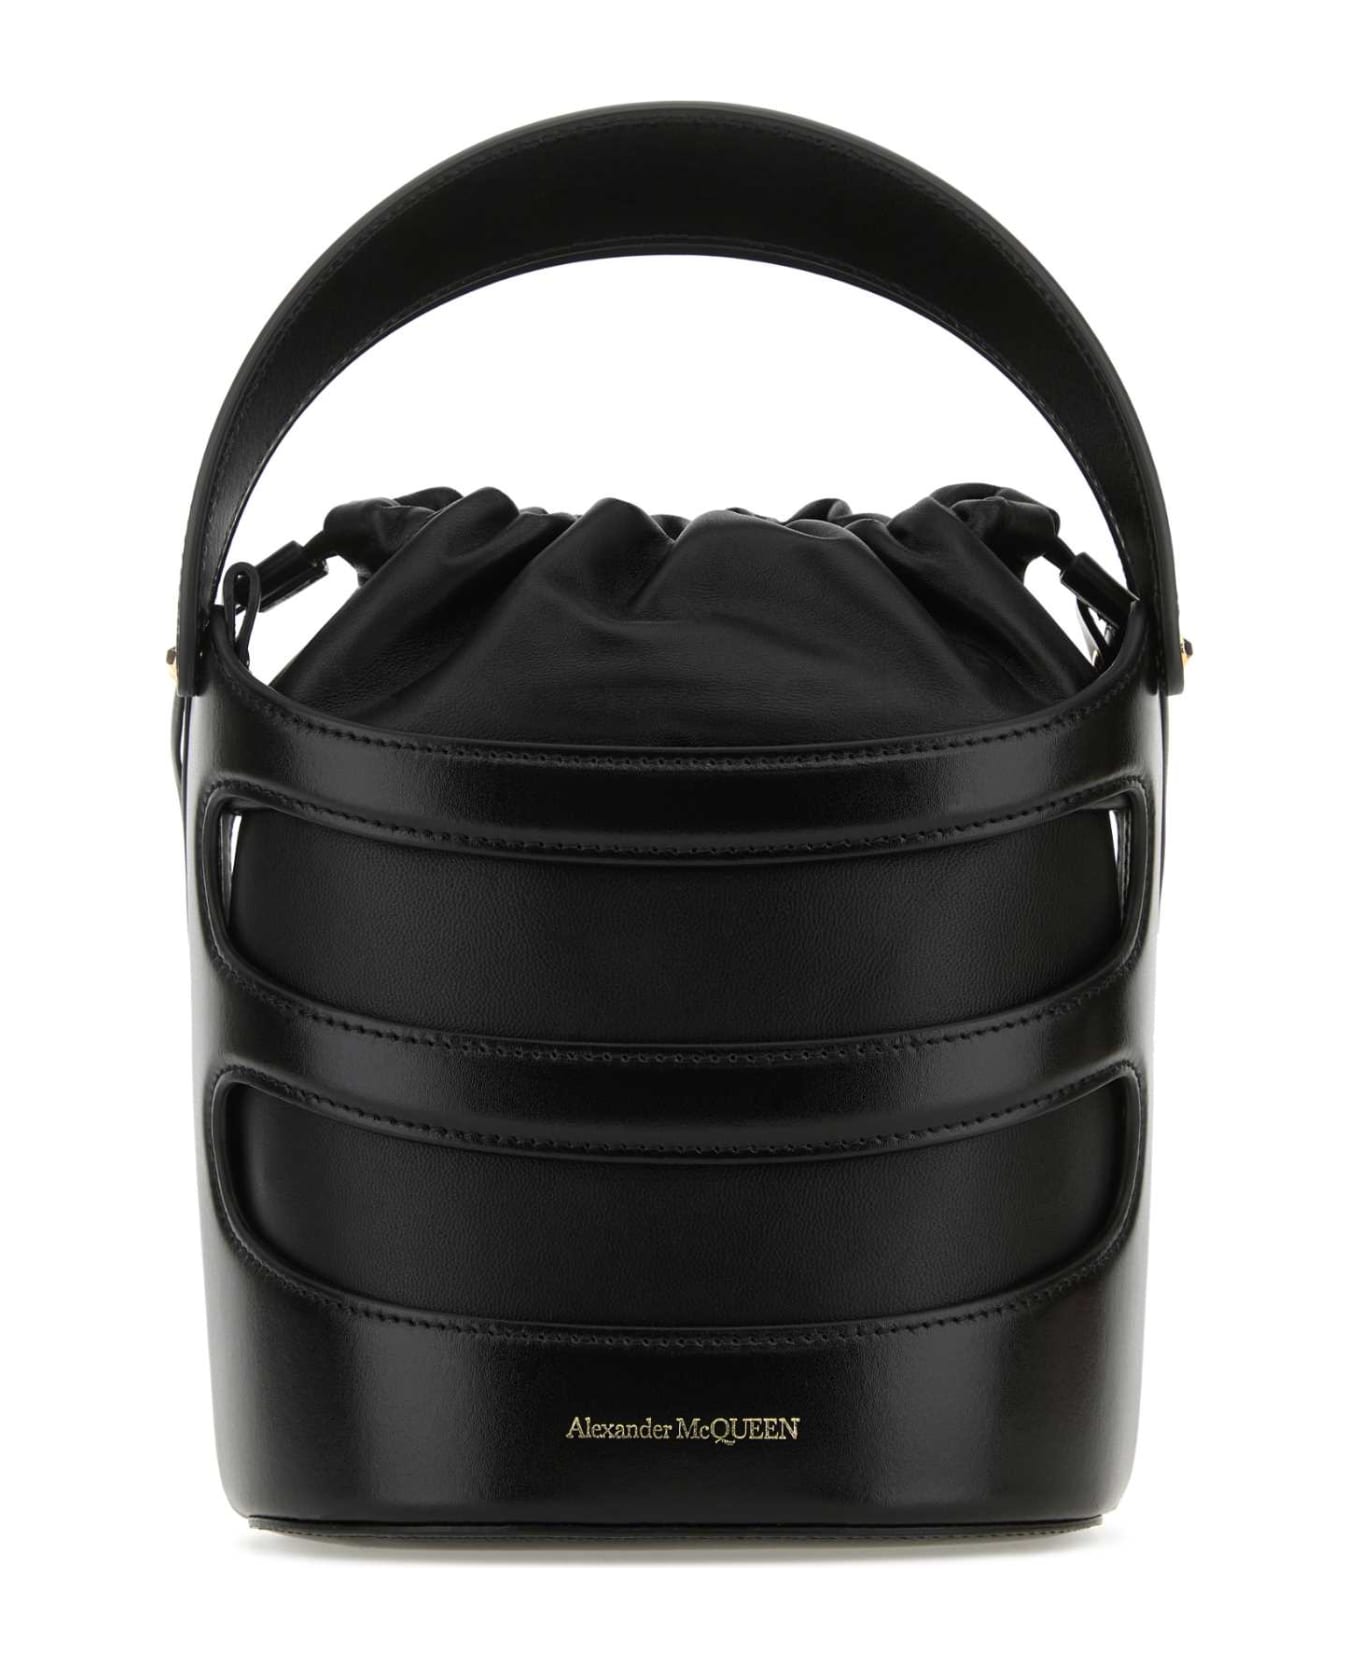 Alexander McQueen Black Leather The Rise Bucket Bag - NEROBIANCO トートバッグ